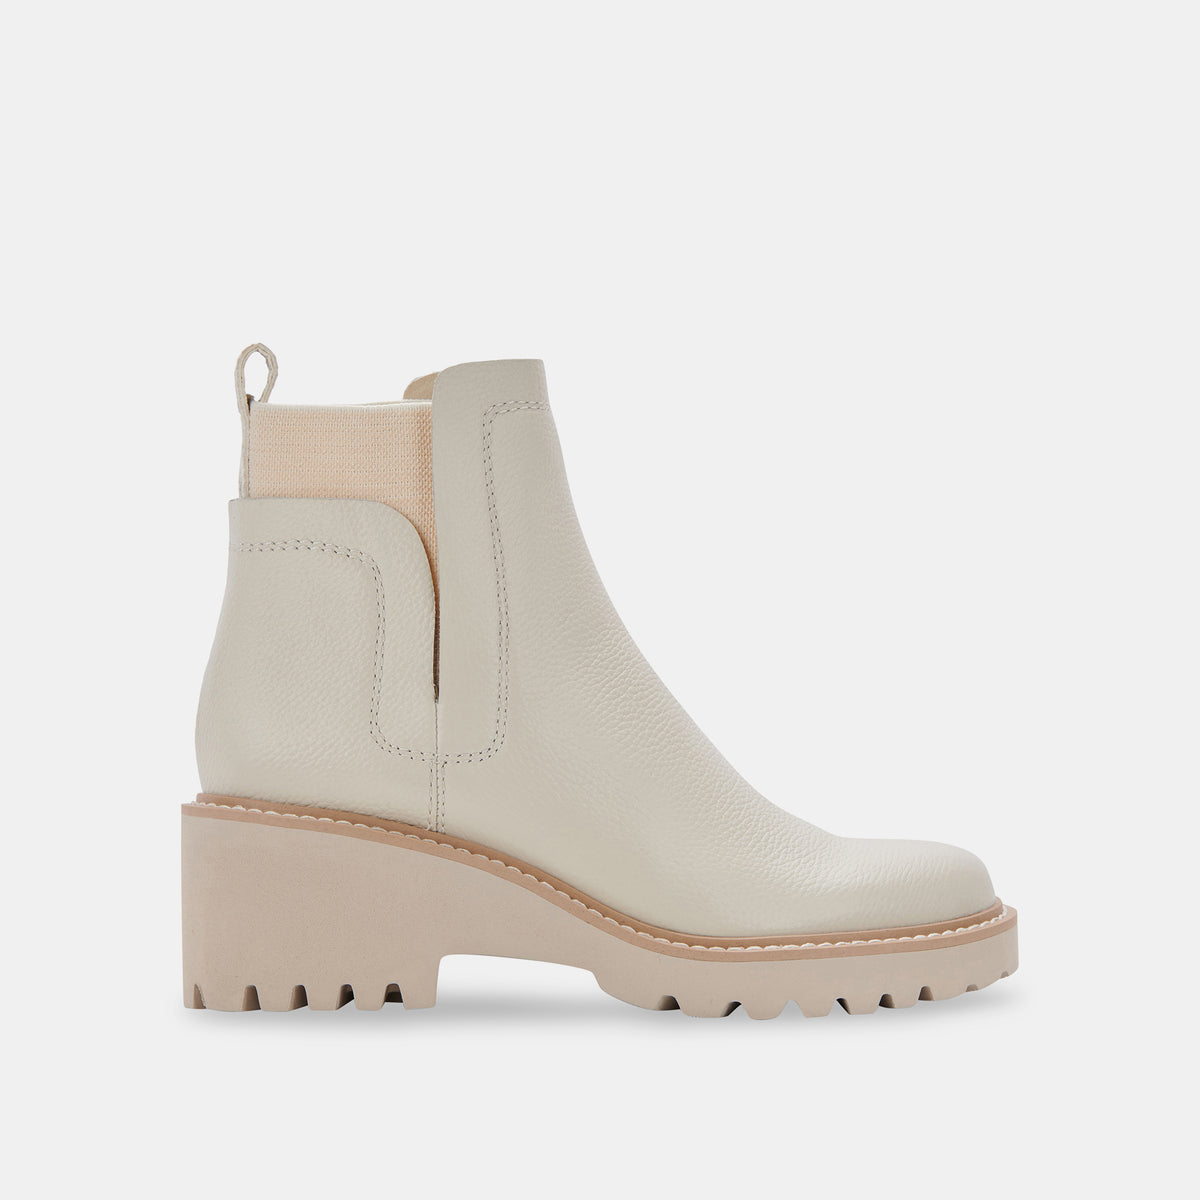 HUEY H2O BOOTS OFF WHITE LEATHER